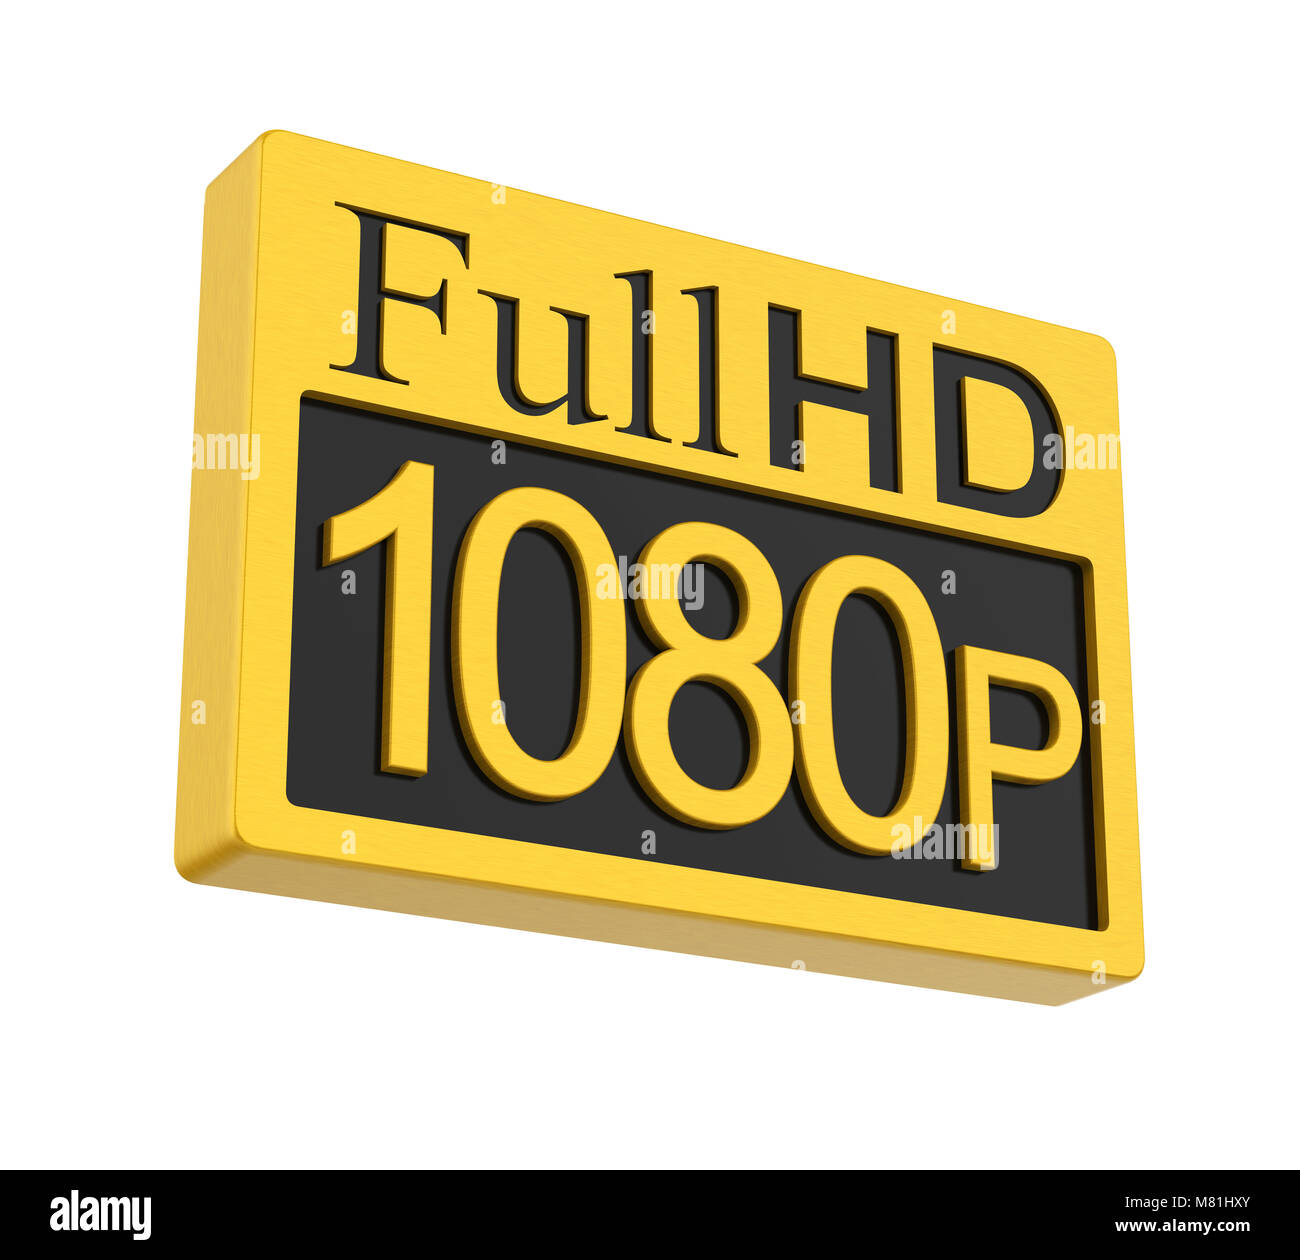 1080p fullhd Cut Out Stock Images & Pictures - Alamy